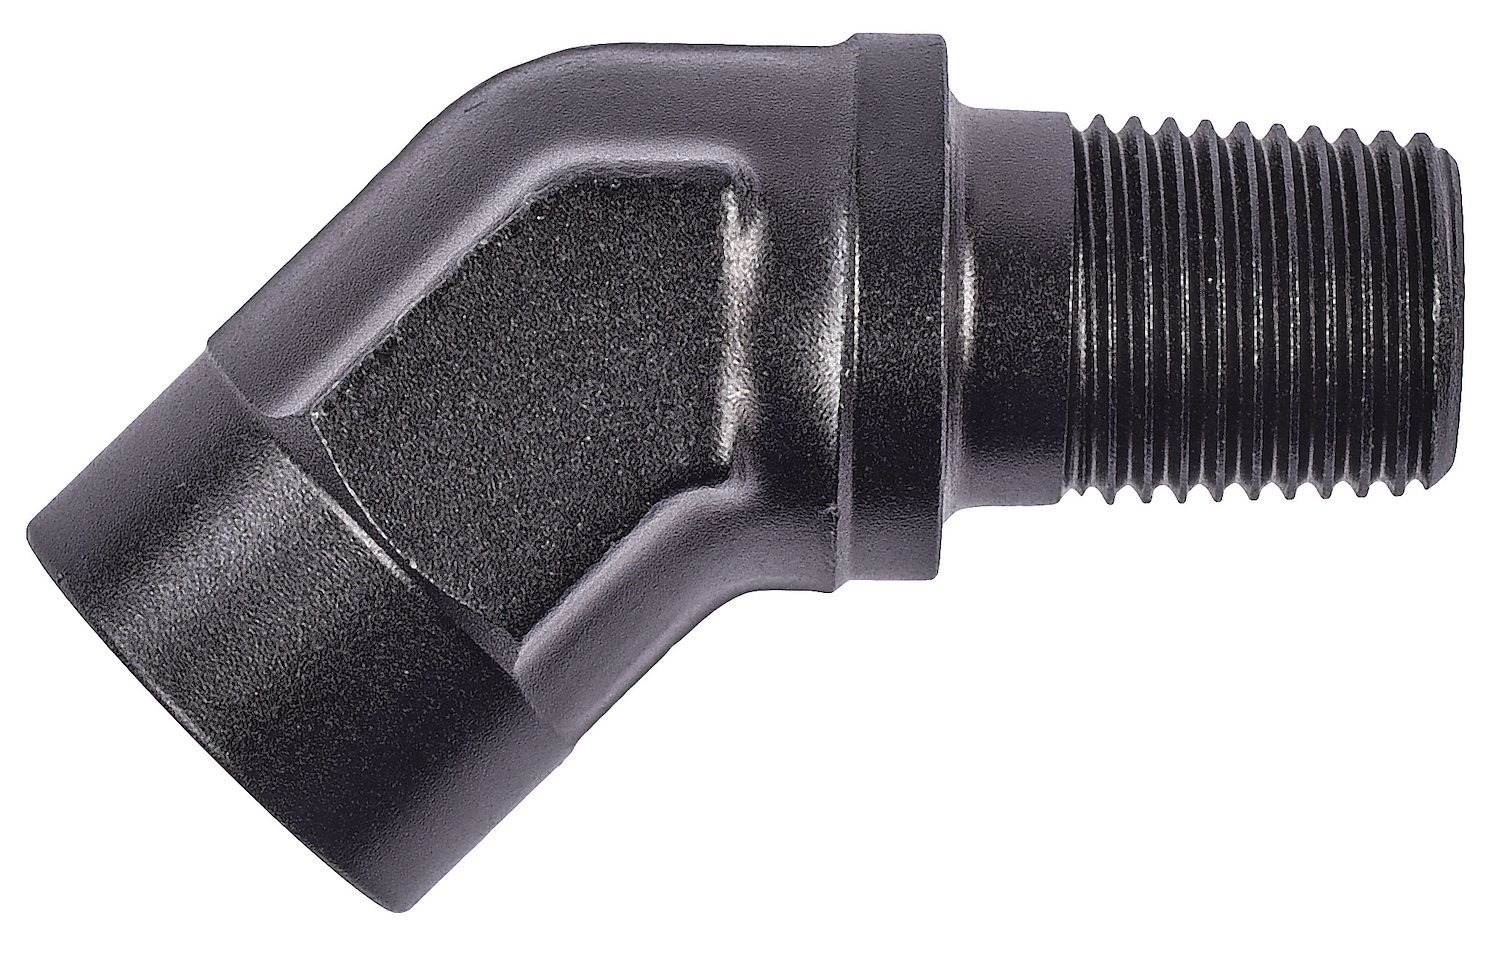 NPT to NPT 45-Degree Union Fitting [1/8 in. NPT Male to 1/8 in. NPT Female, Black]